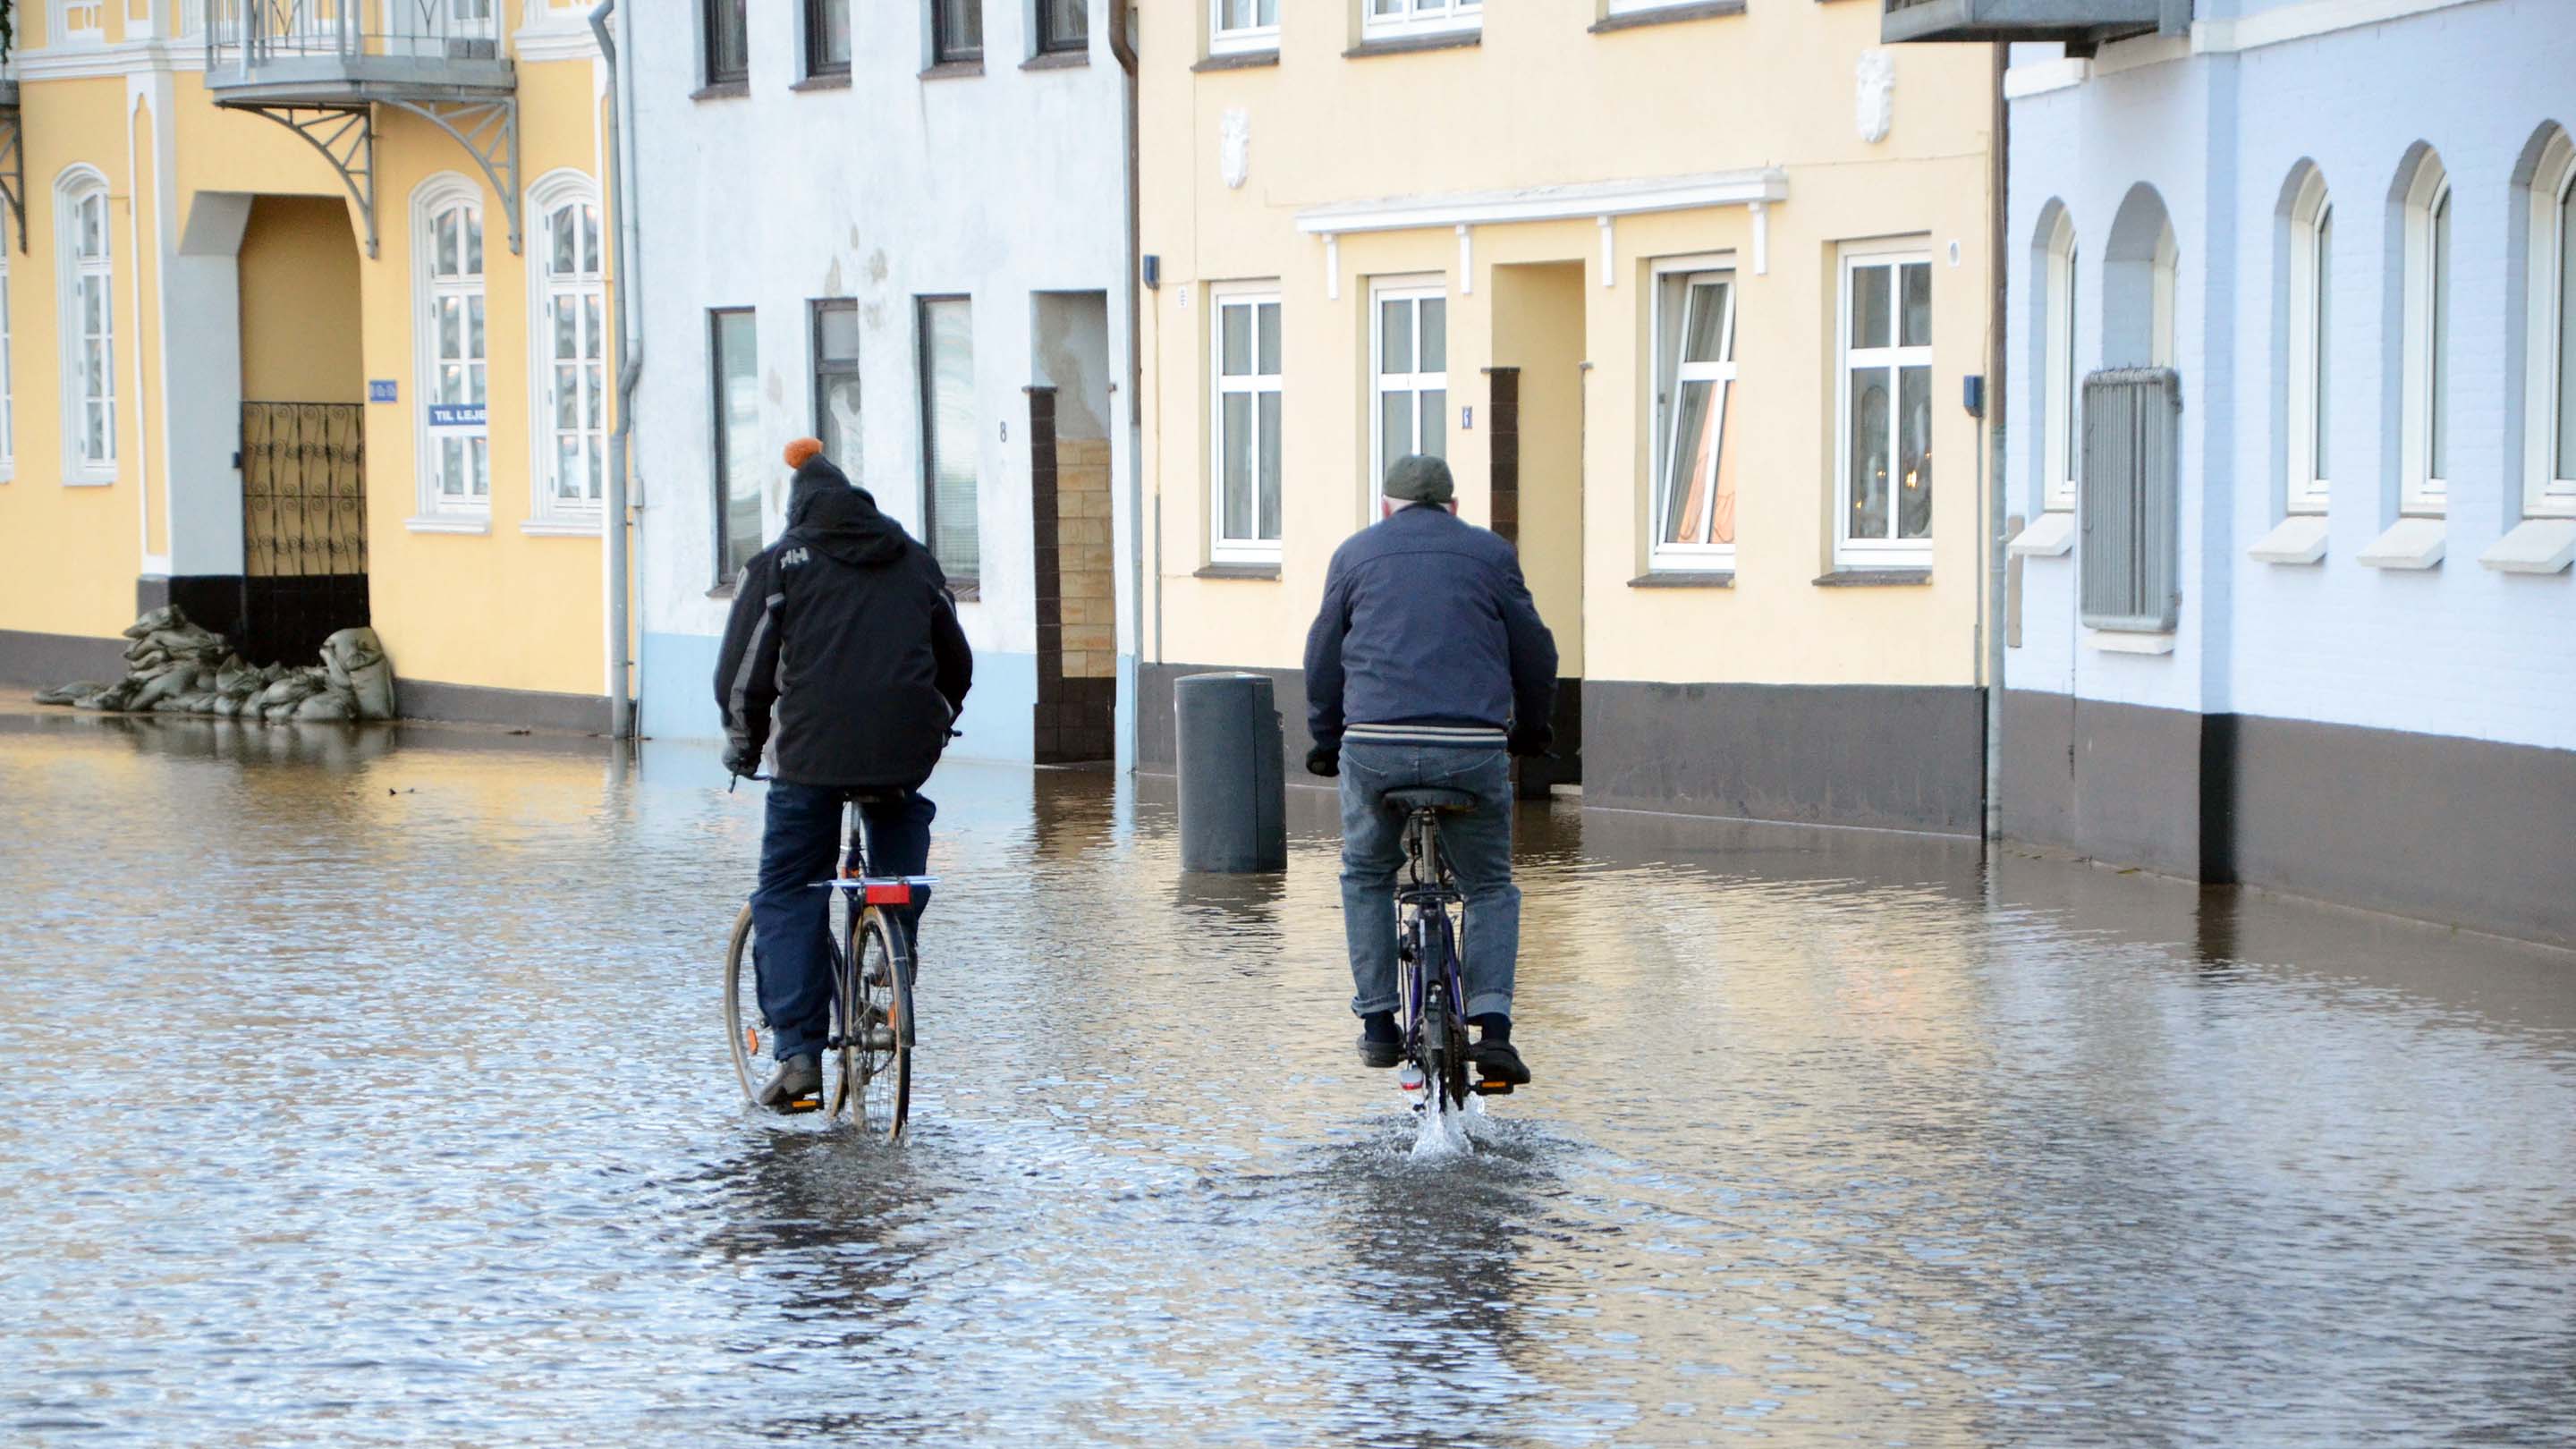 Two people ride bicycles through a flooded street